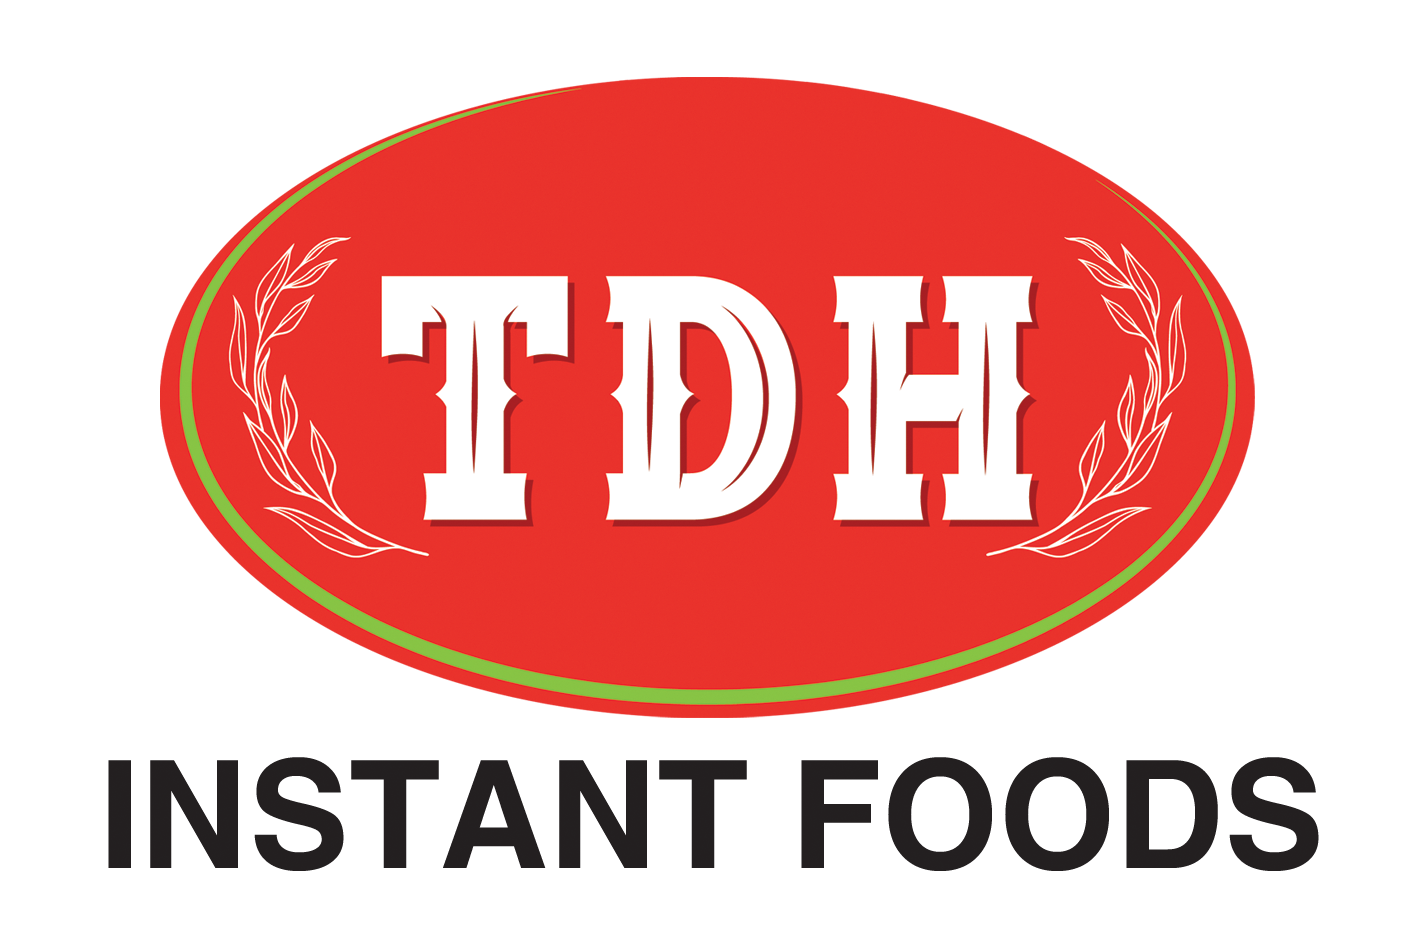 TDH Food Products